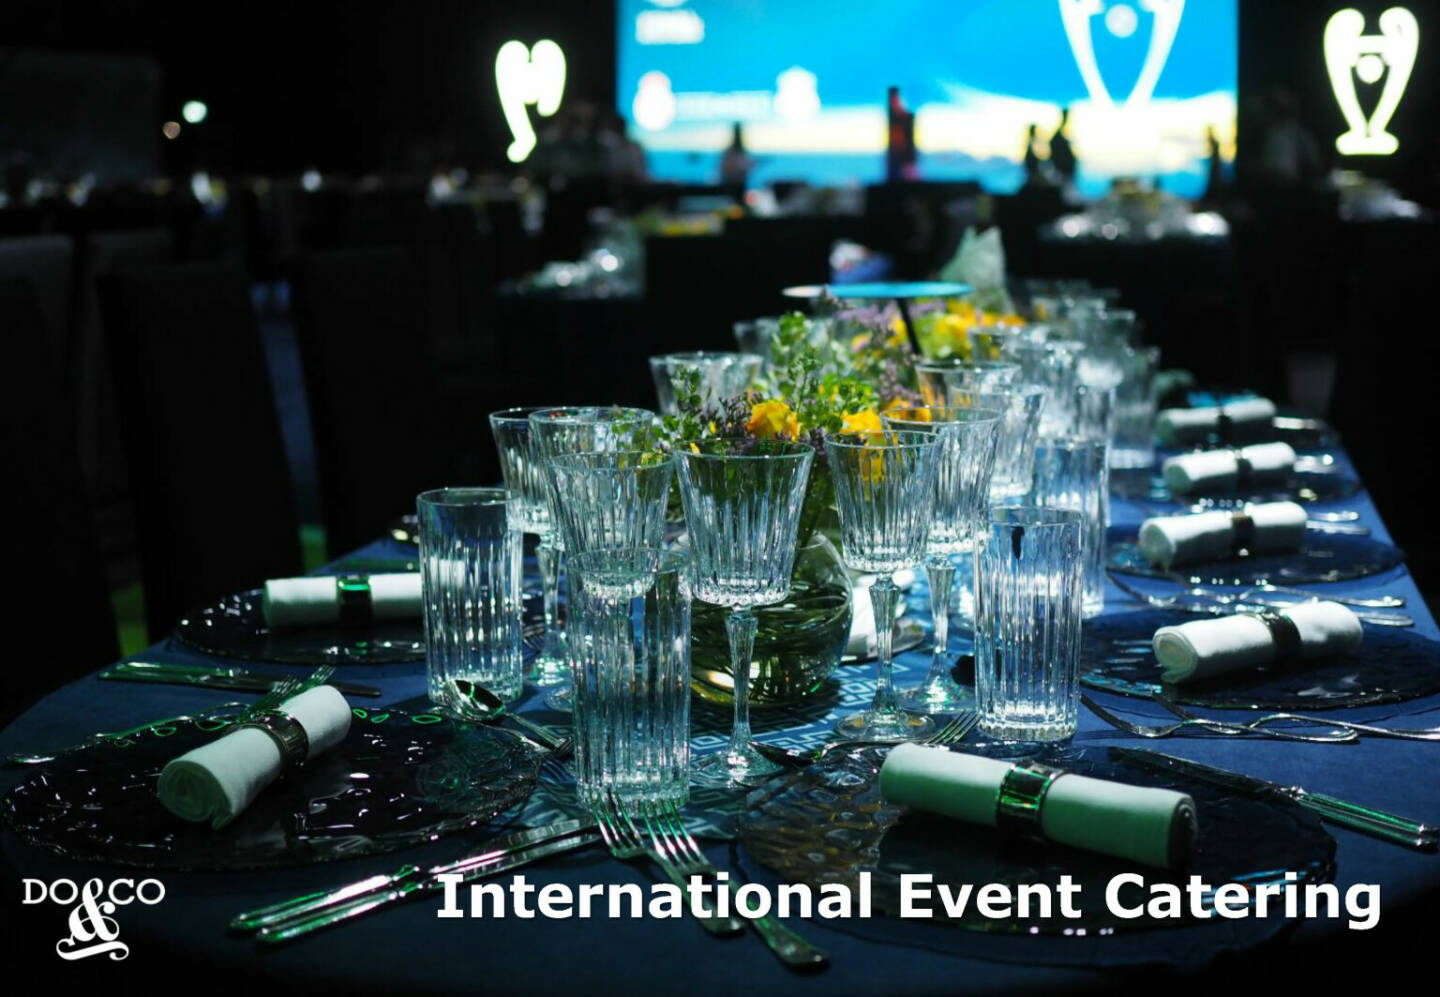 Do&Co - International Event Catering